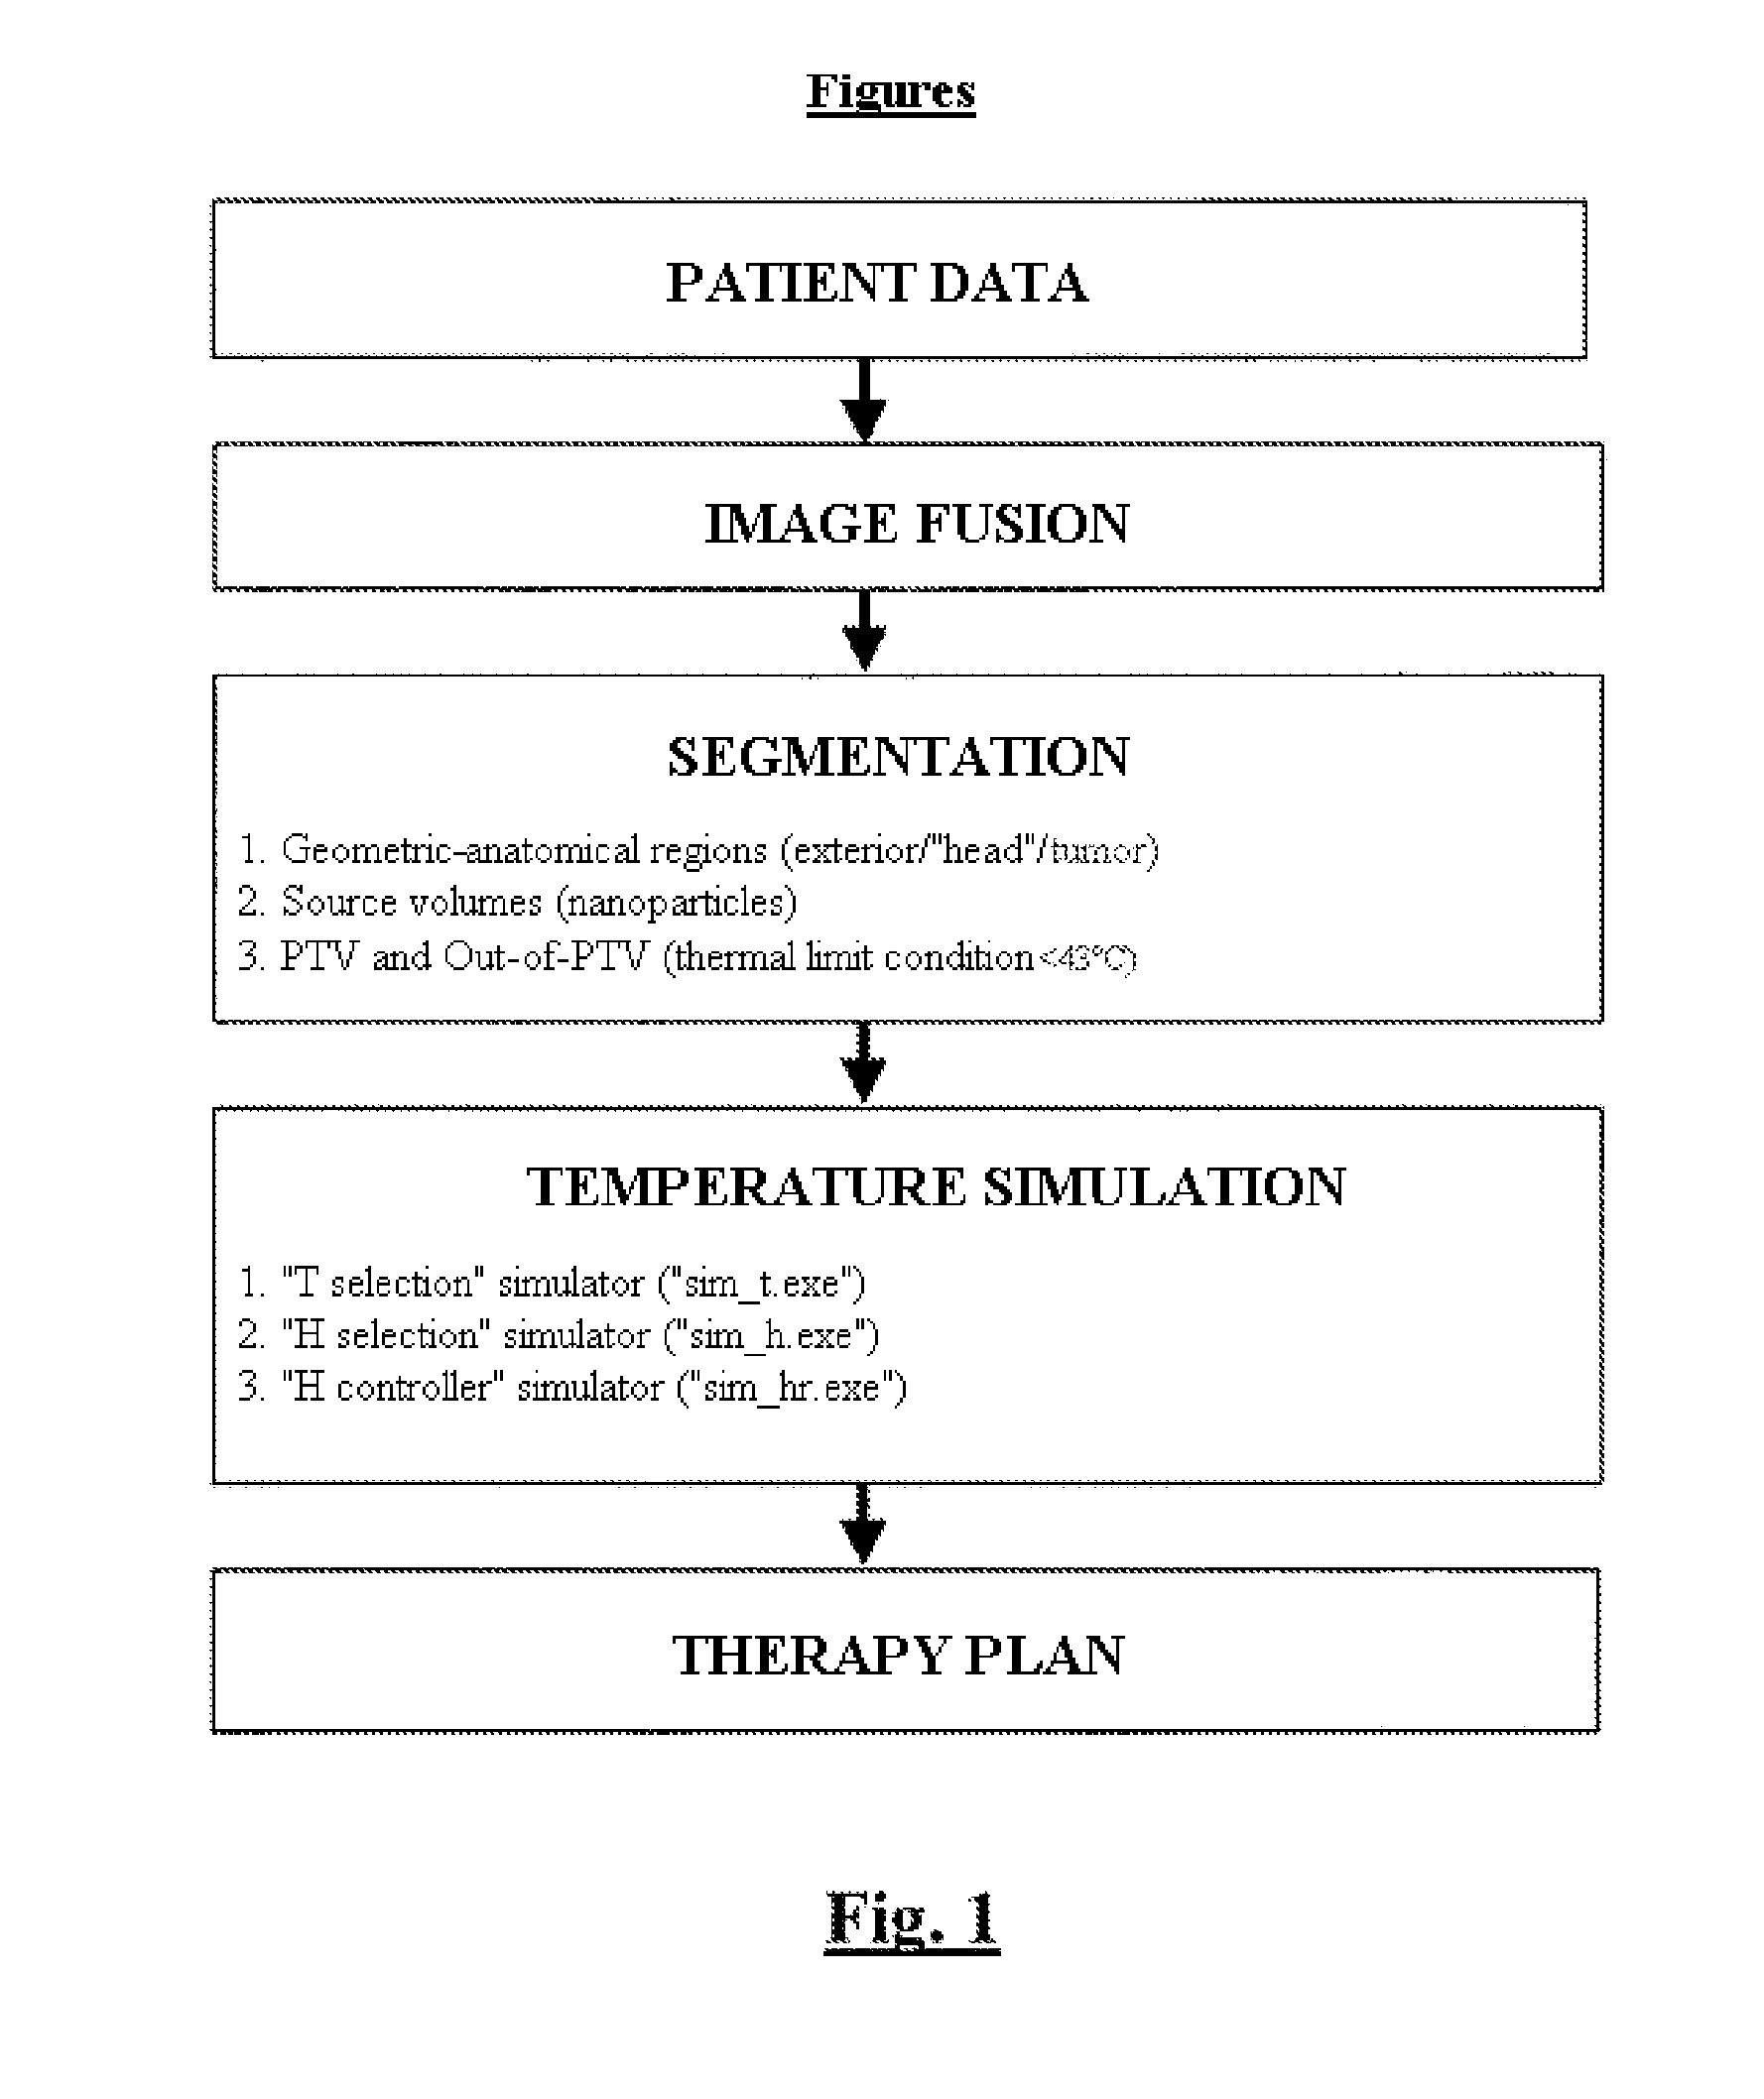 Computer-aided simulation tool for providing assistance in the planning of thermotherapy